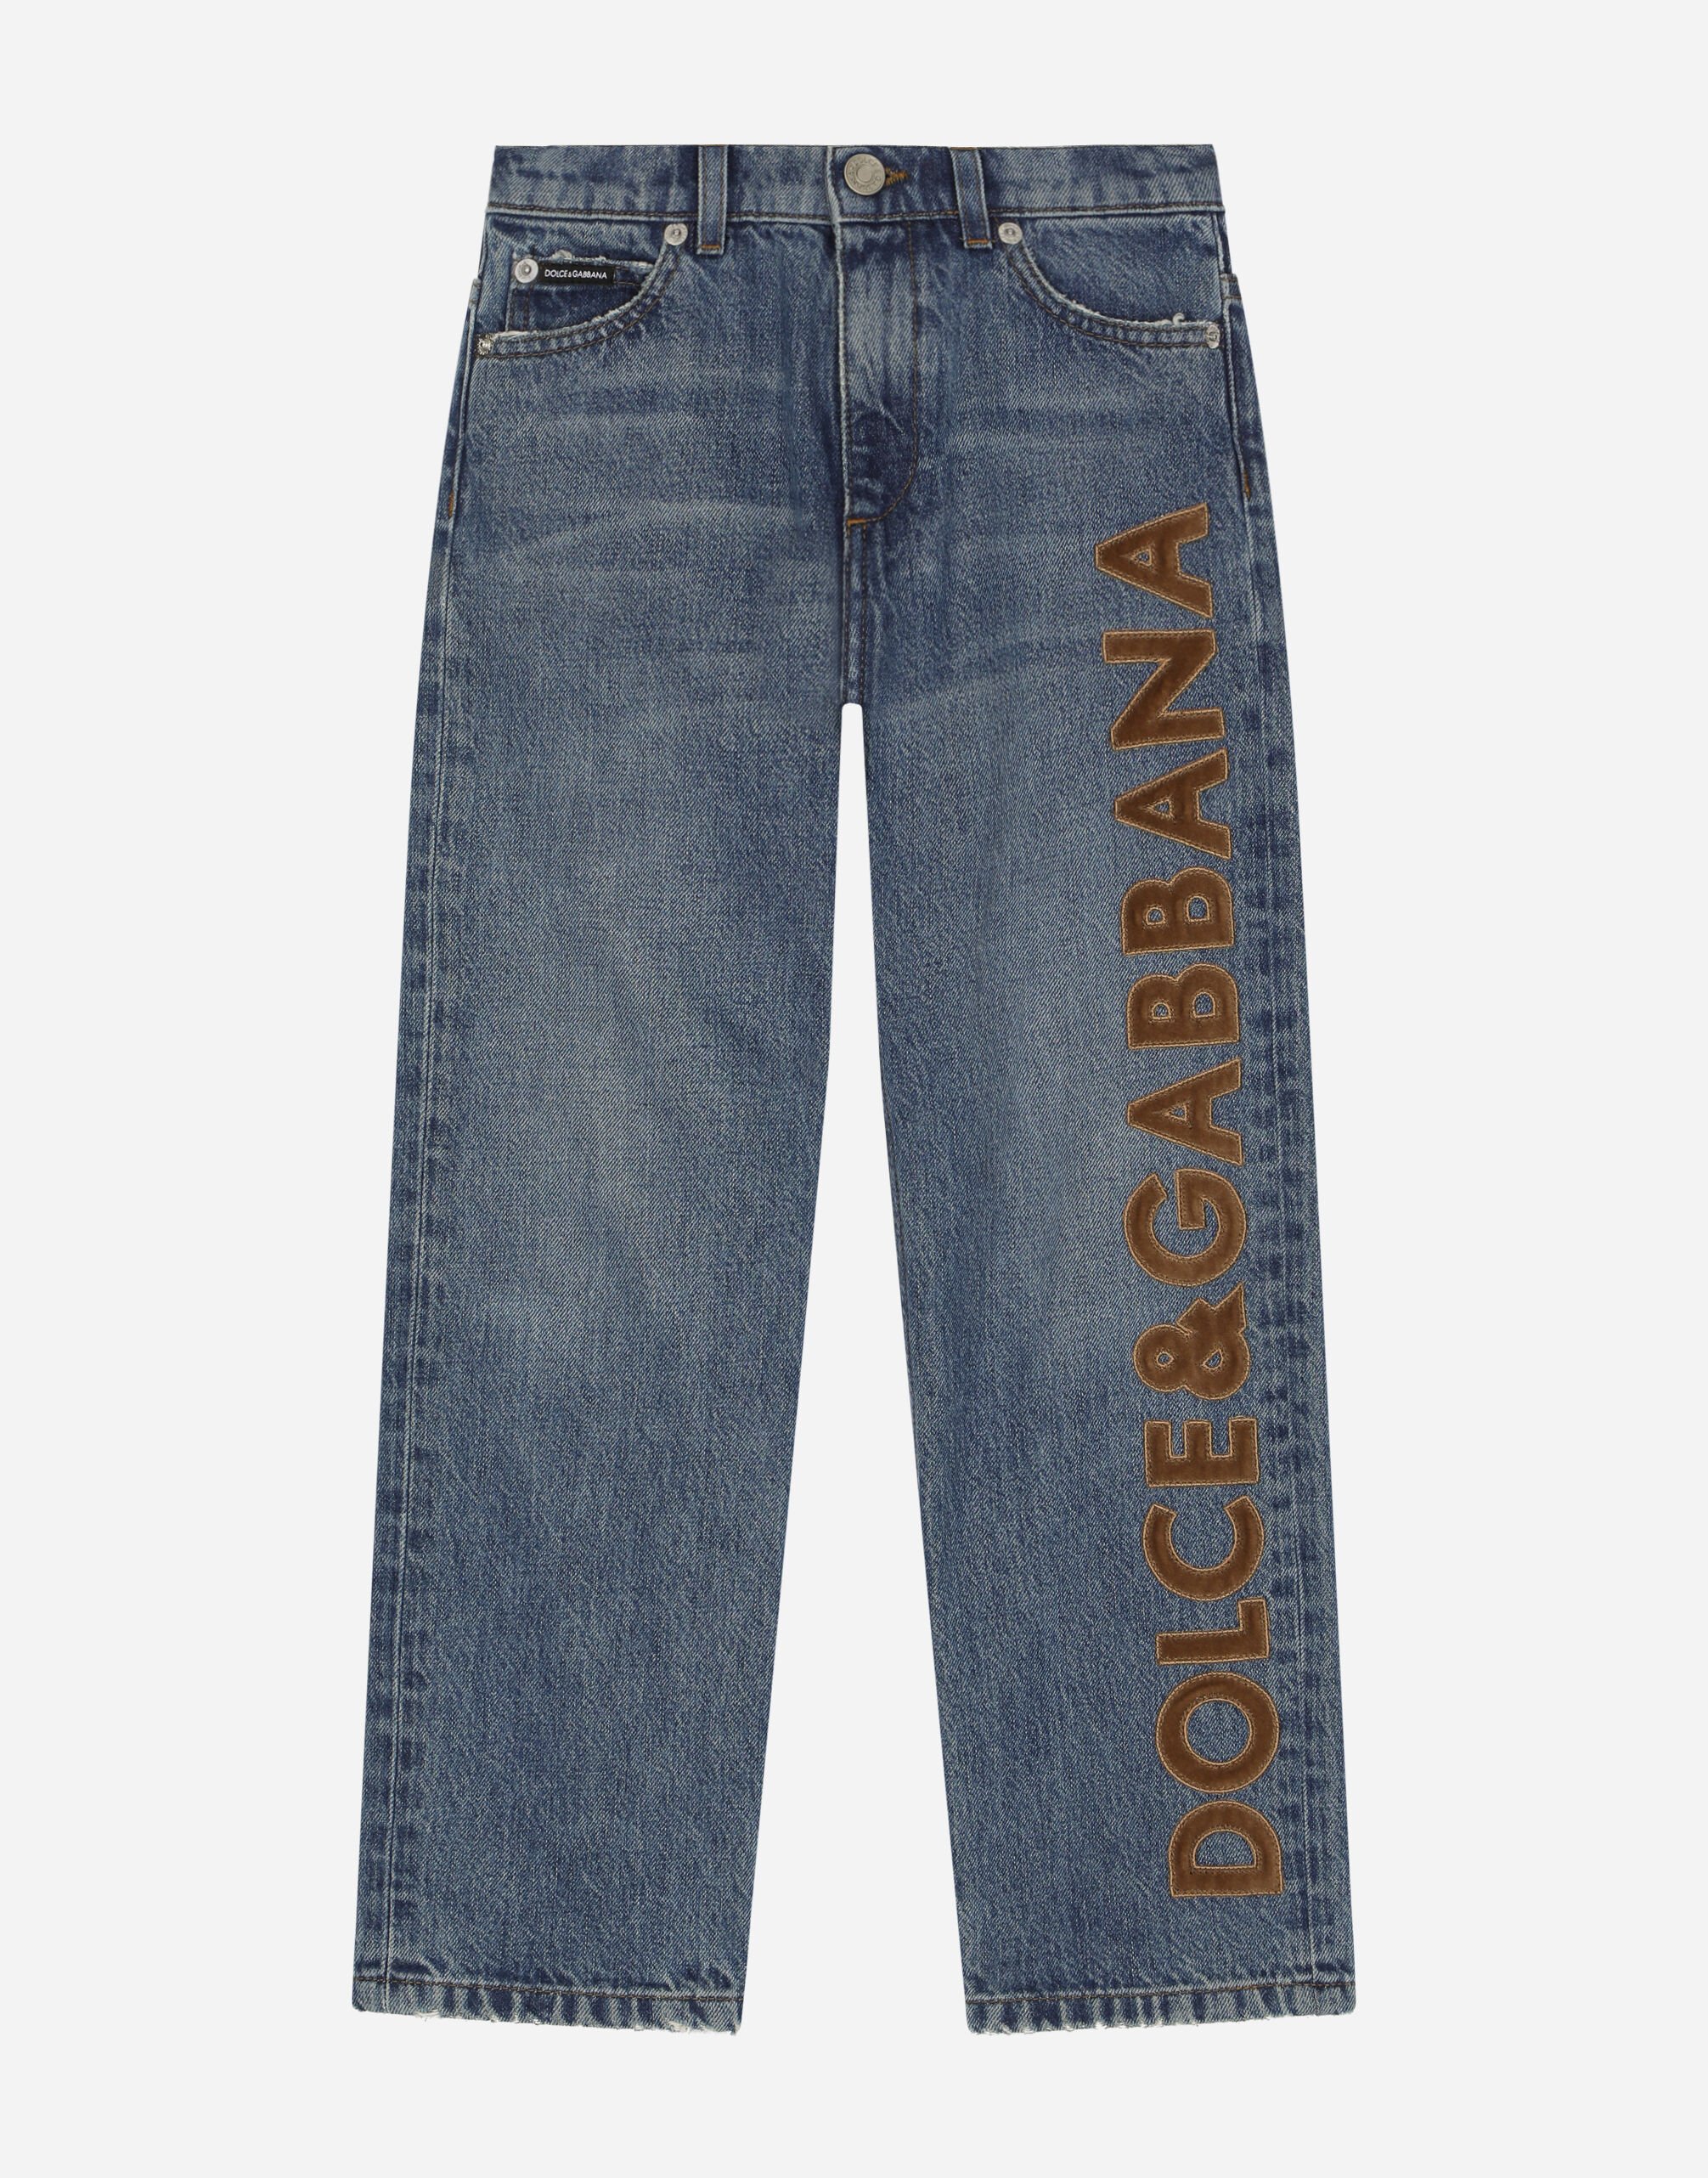 Dolce & Gabbana 5-pocket treated denim jeans with logo appliqué and the logo tag Multicolor L4JPFNHS7KD